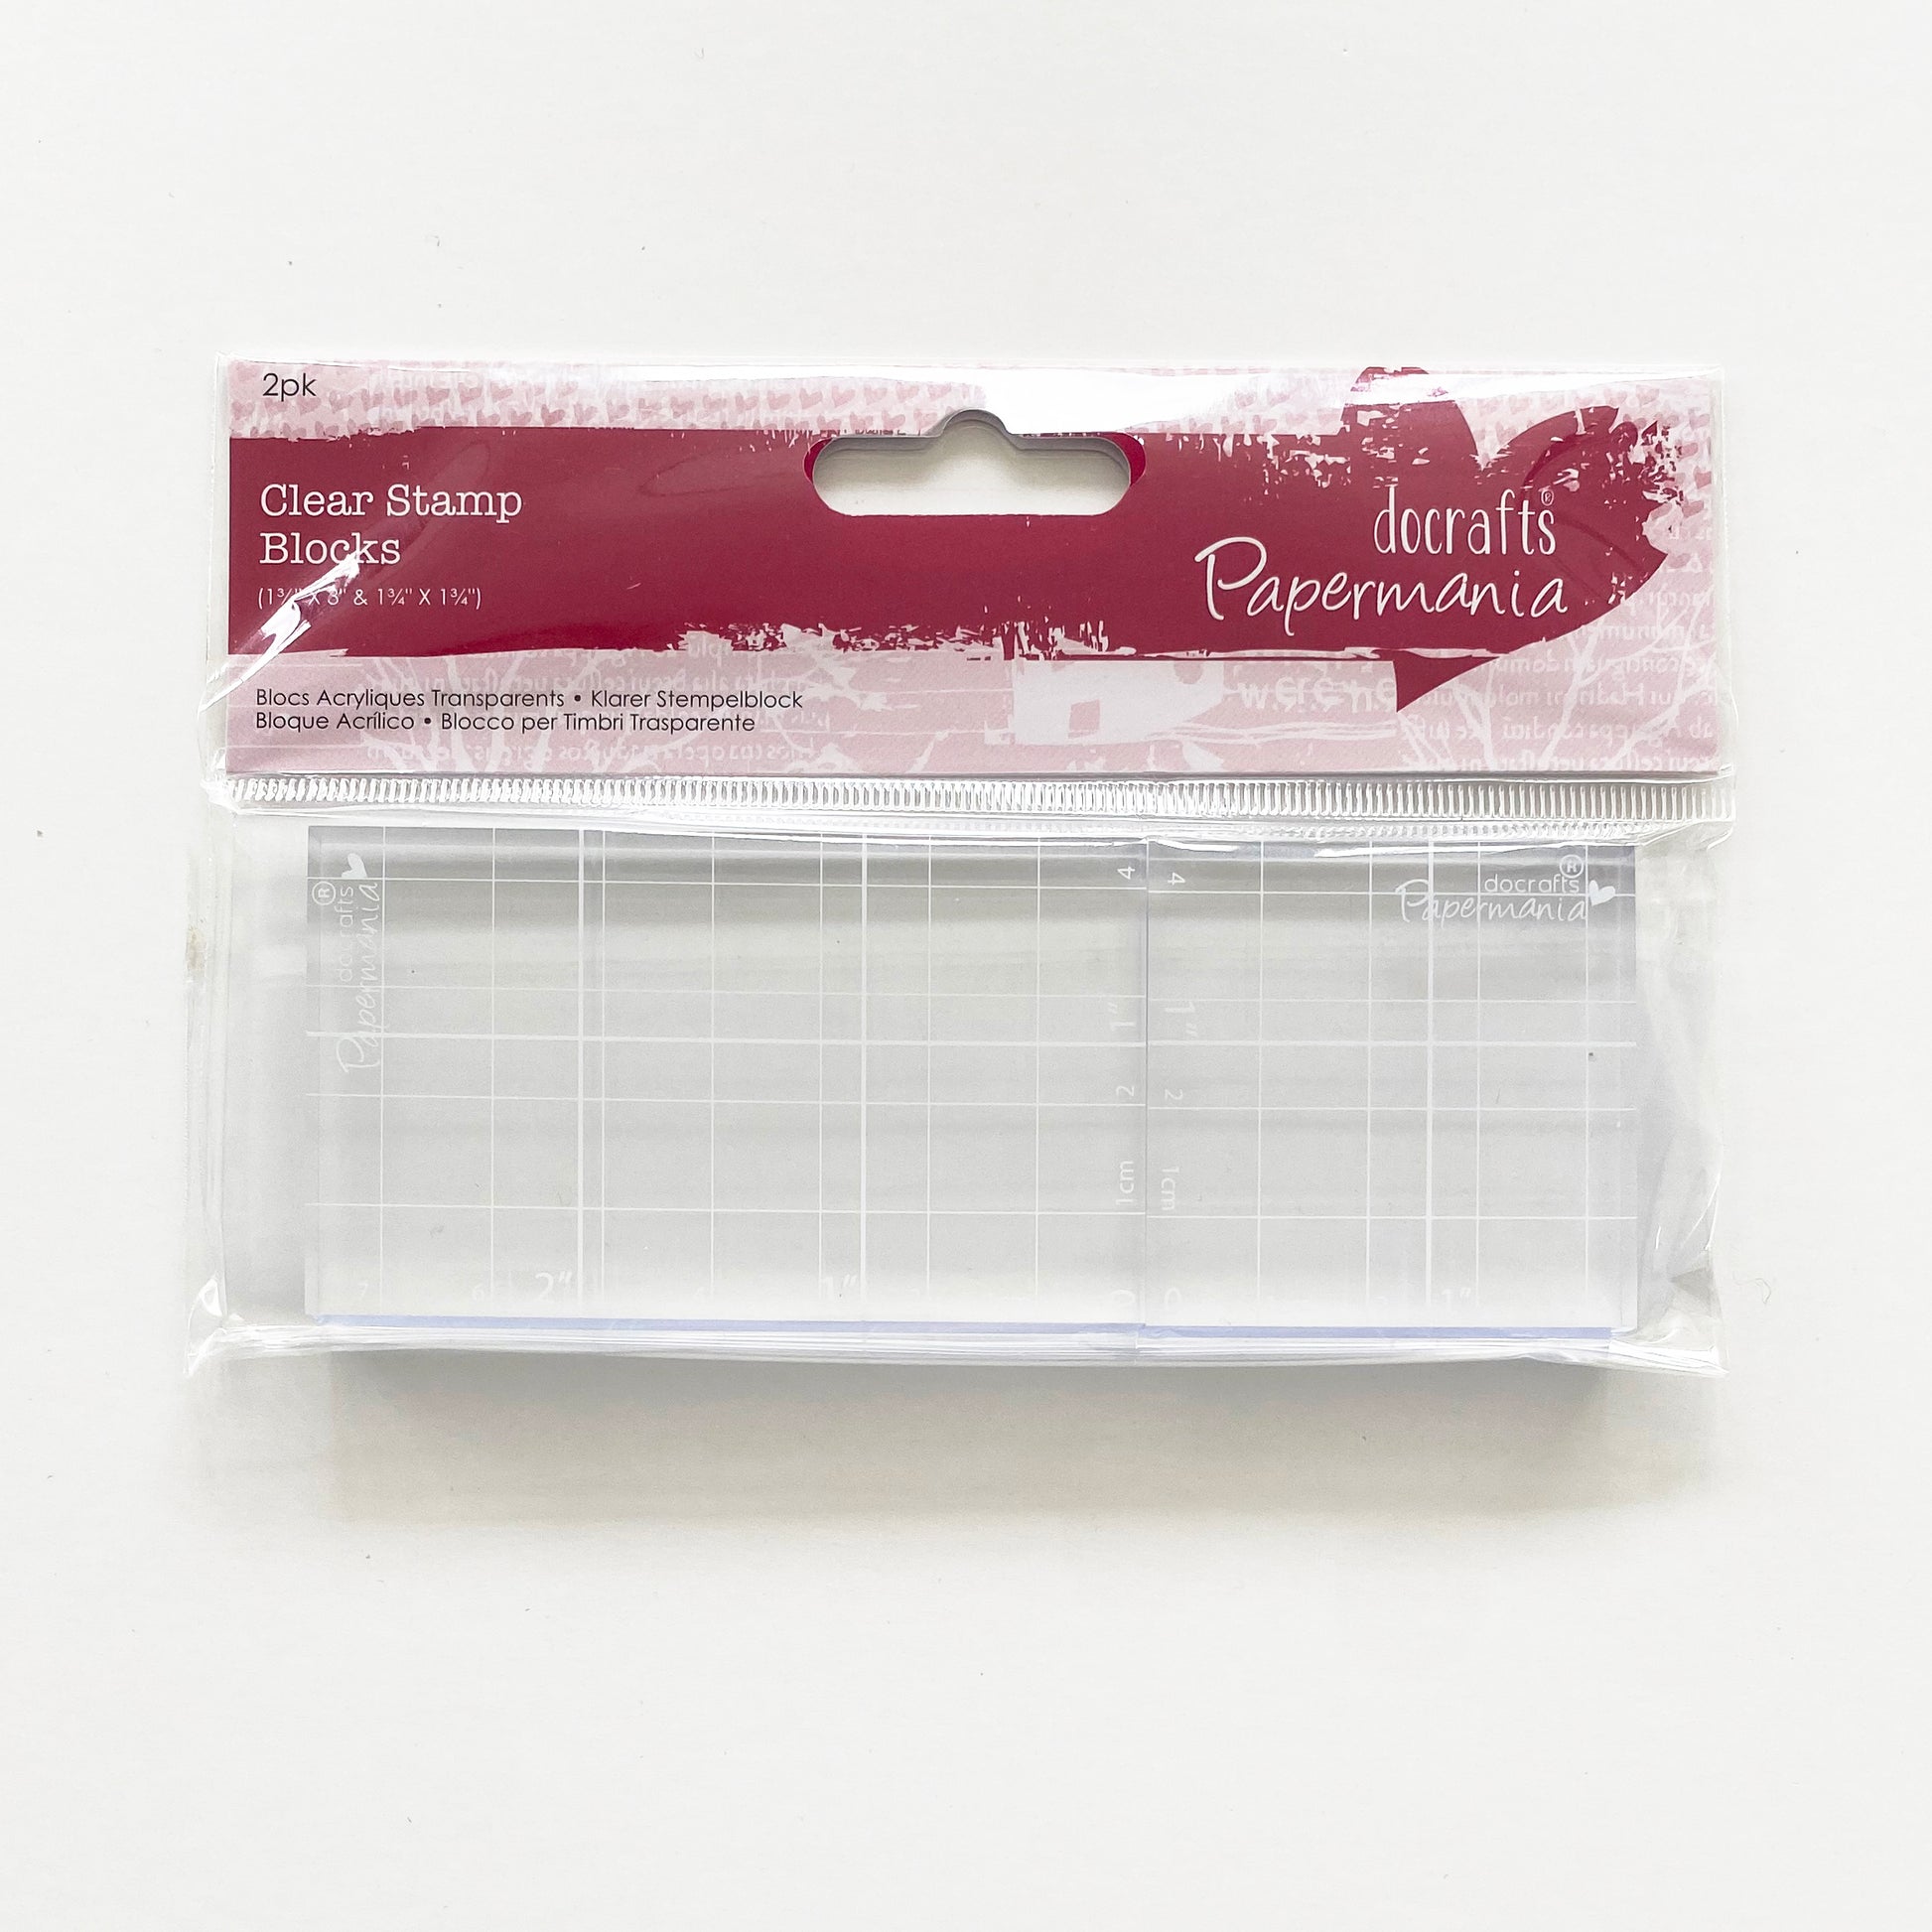 Acrylic Stamp Block Cling Clear Stamping | 4 sizes | Inch & Cm Marking with Grid - SweetpeaStore